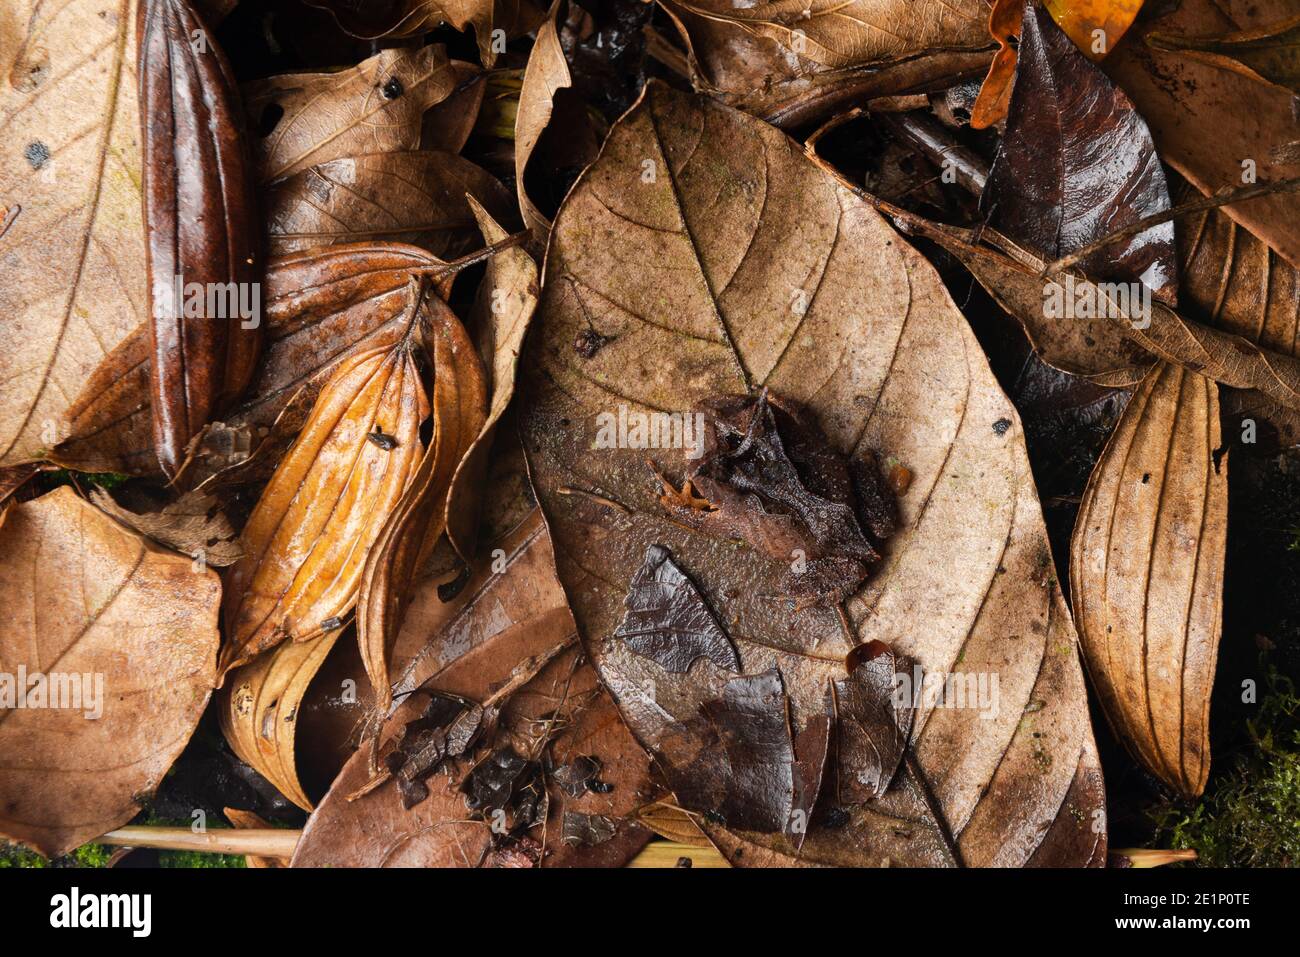 A Horned Frog (Proceratophrys boiei) camouflaged on the leat litter in the Atlantic Rainforest of SE Brazil Stock Photo